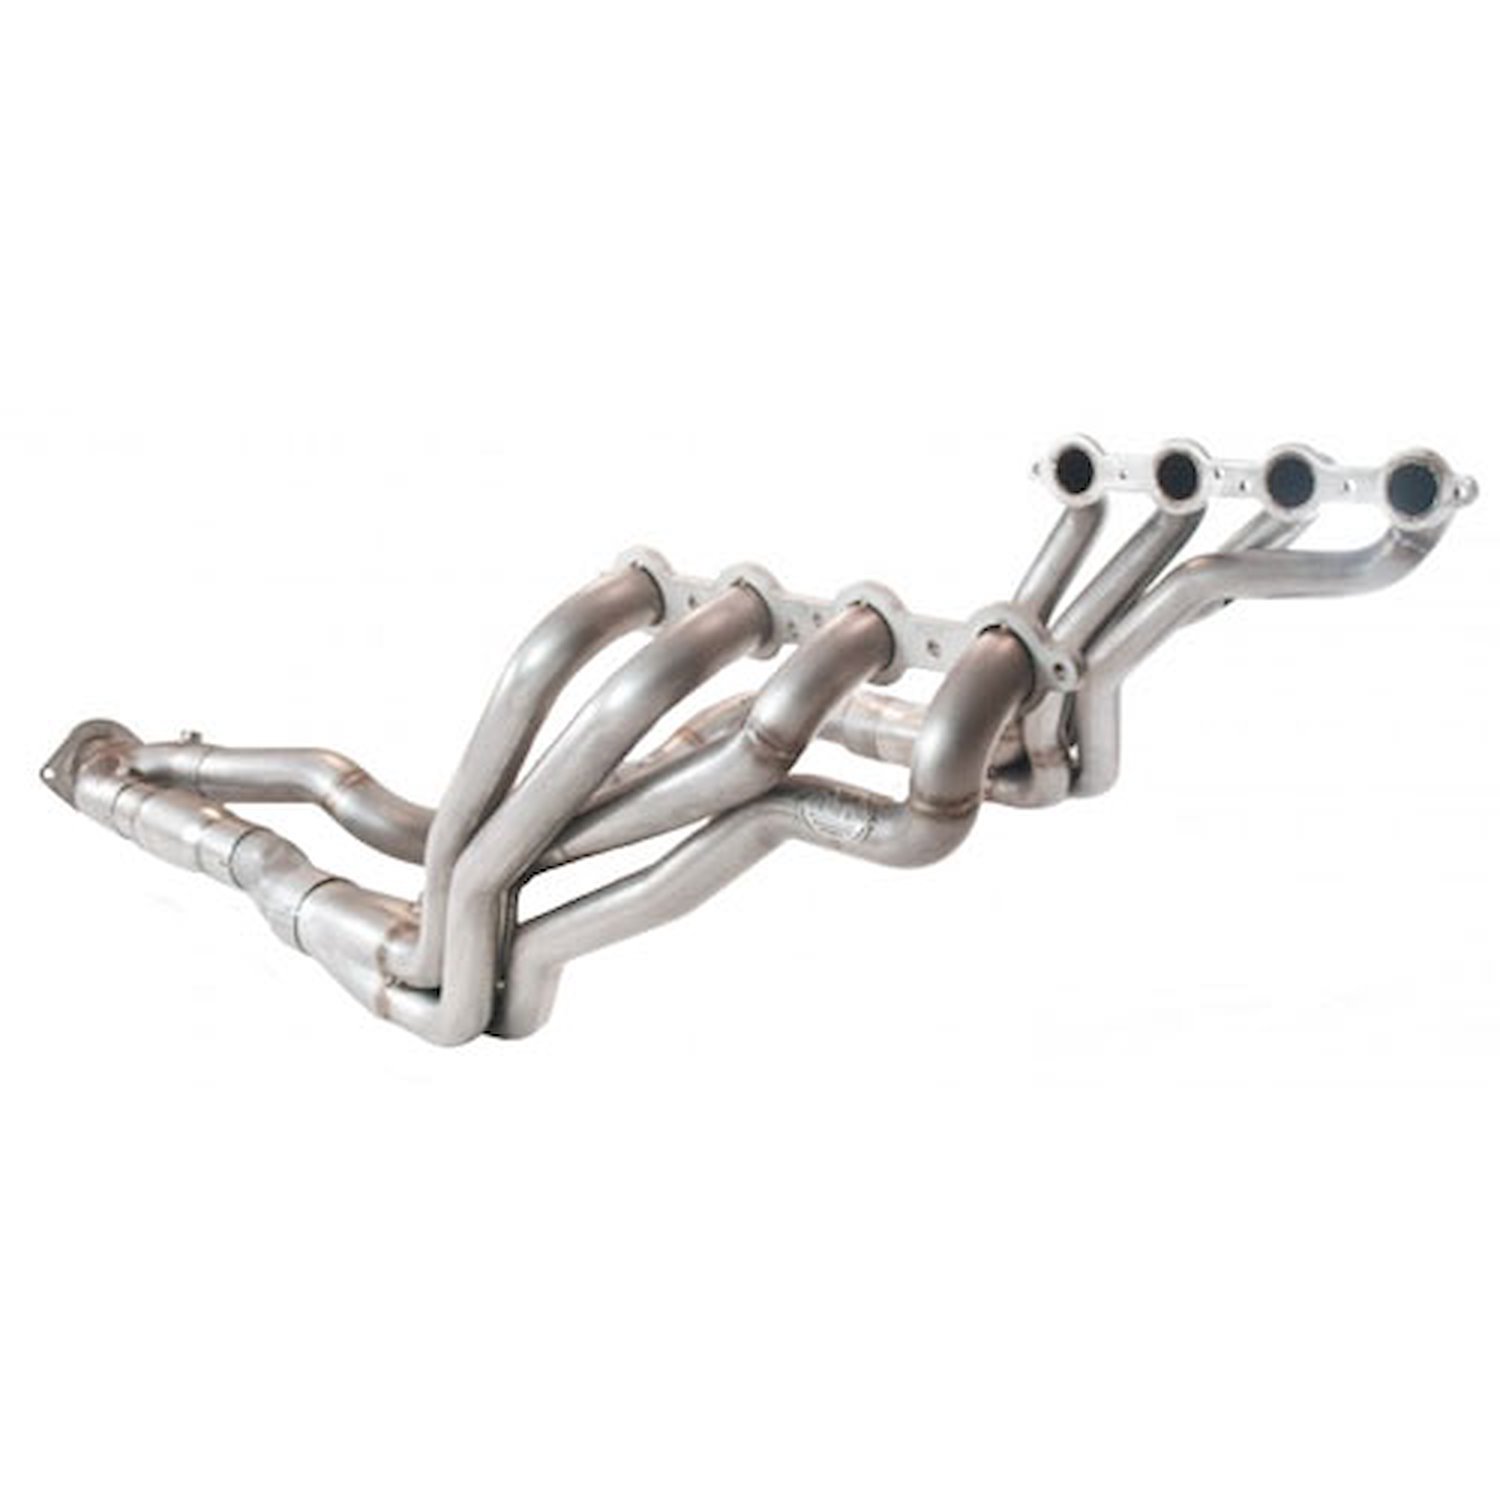 2006-2009 CHEVY 6.0L TRAILBLAZER SS LONG TUBE SS HEADERS WITH 1.750 PRIMARIES AND 2.500 Y-PIPE LEAD